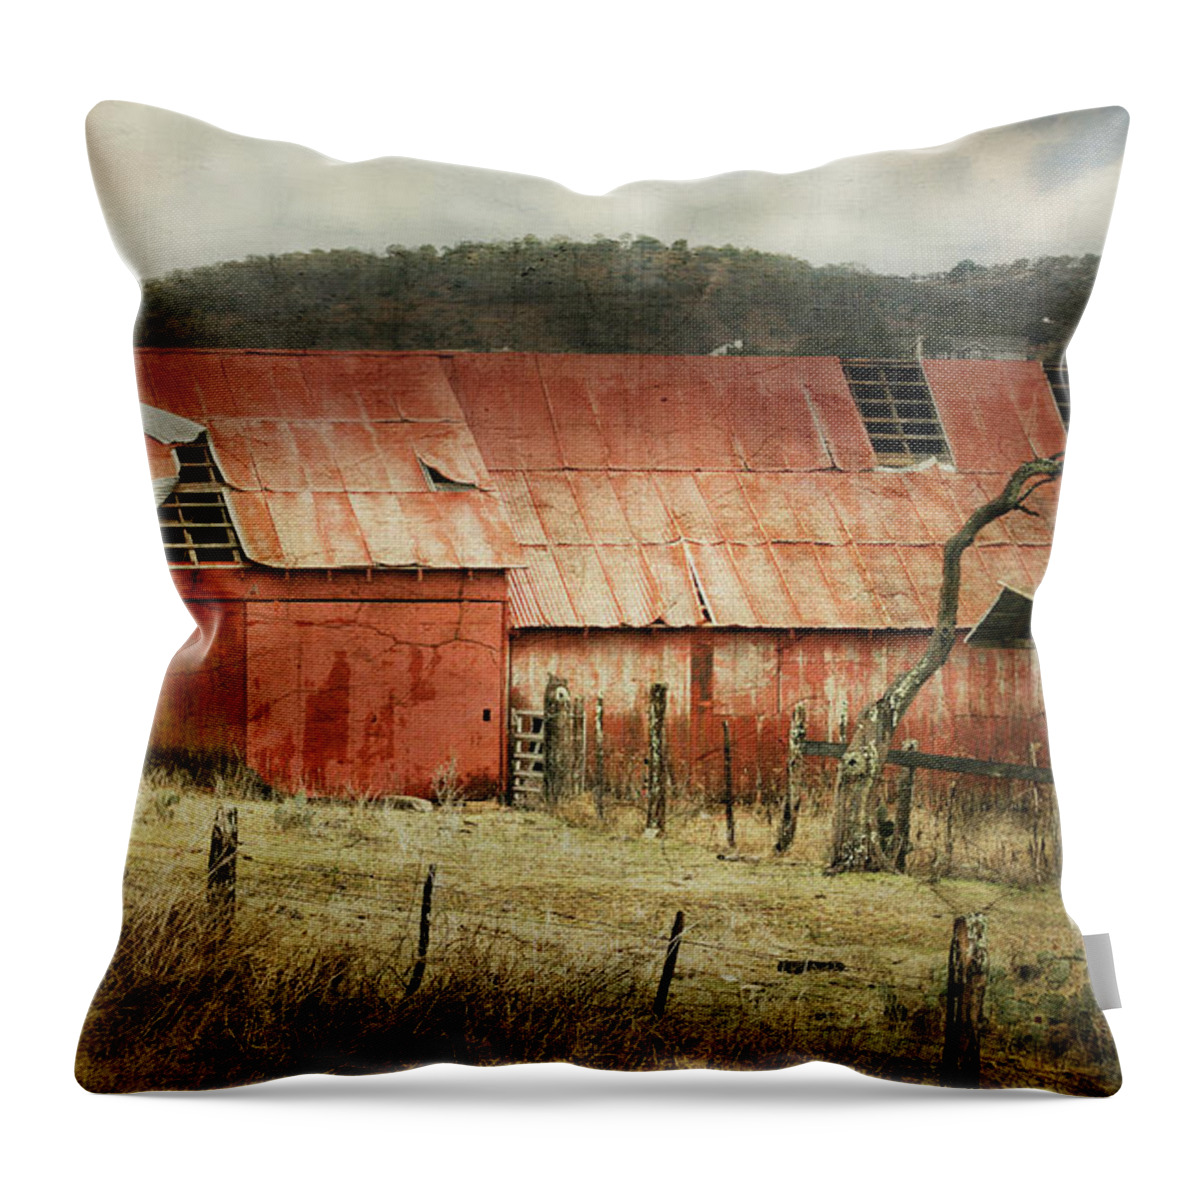 Barn Throw Pillow featuring the photograph Old Red Barn by Joan Bertucci